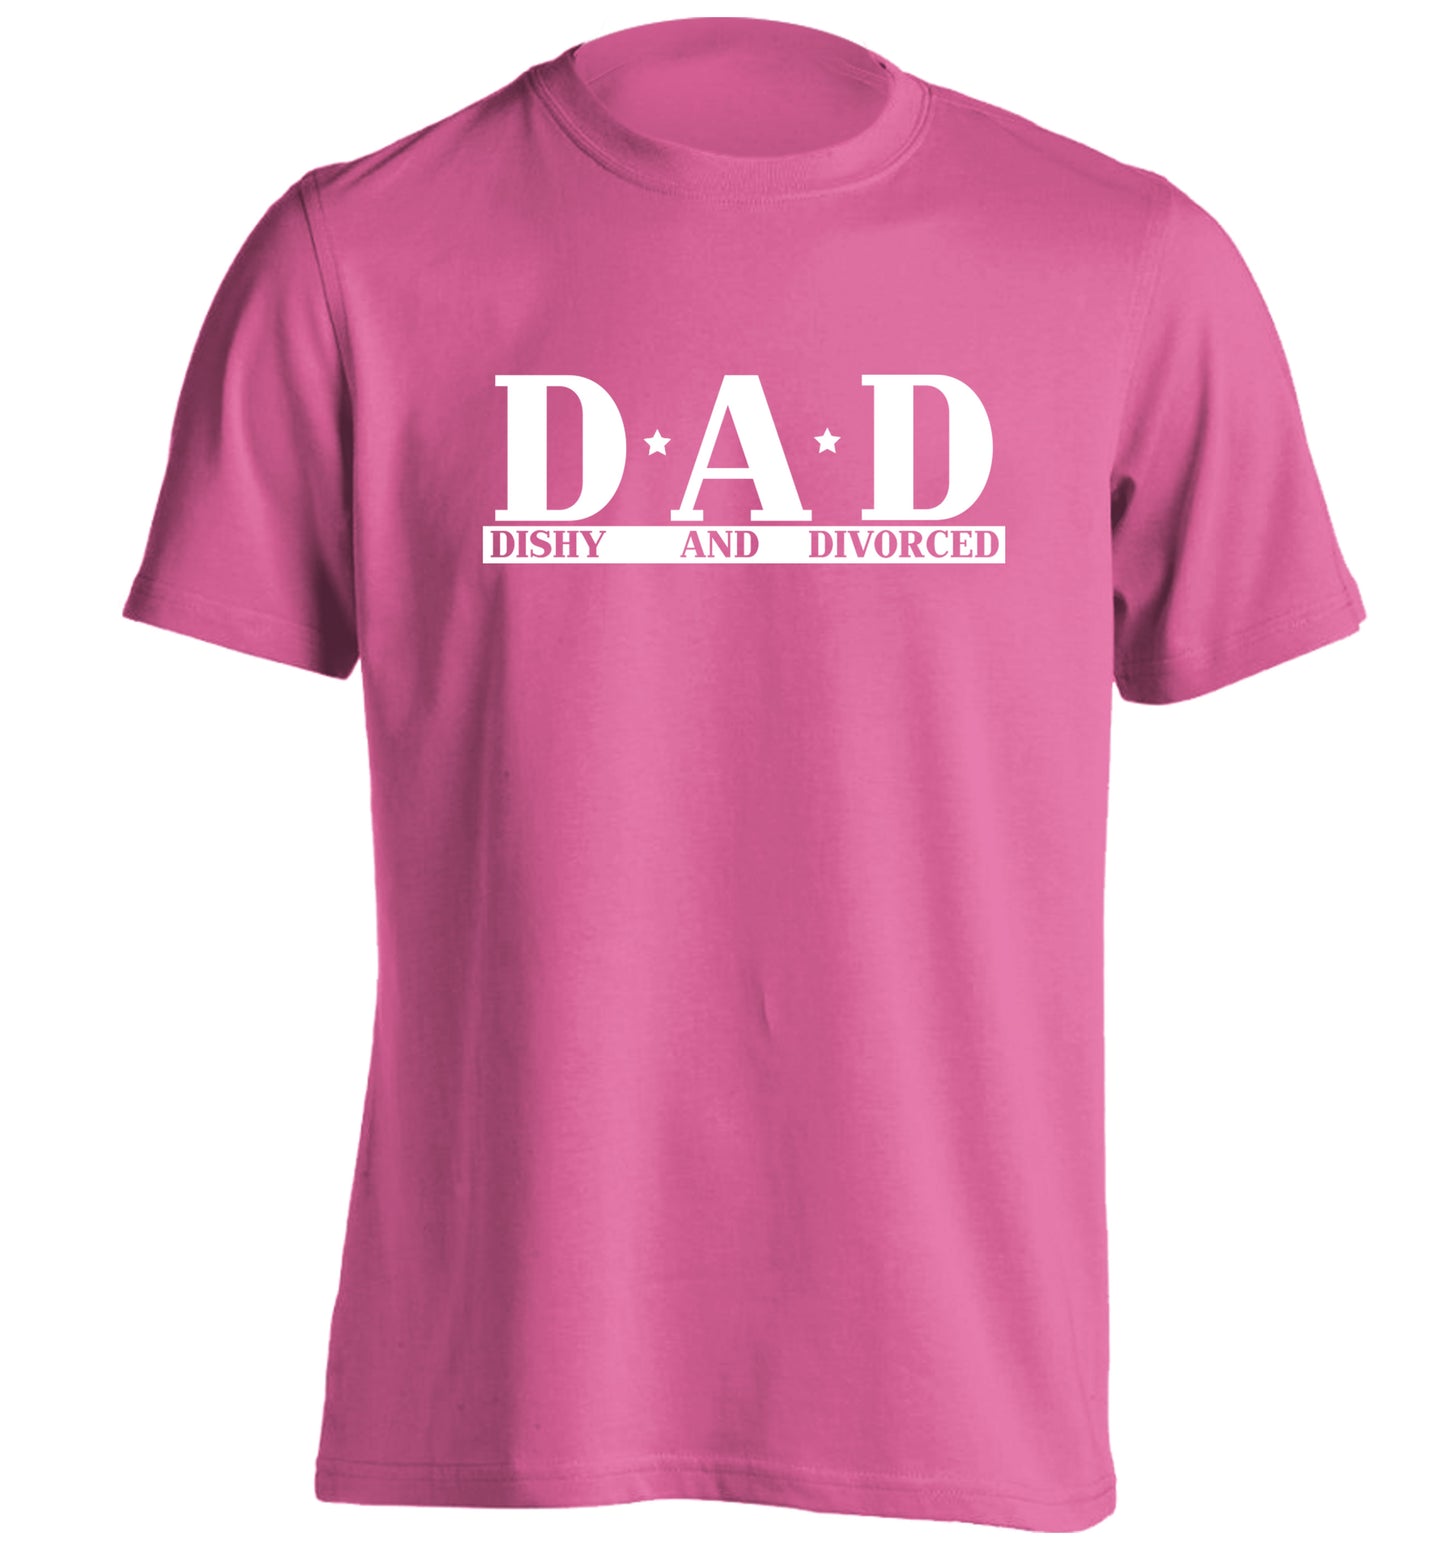 D.A.D meaning Dishy and Divorced adults unisex pink Tshirt 2XL